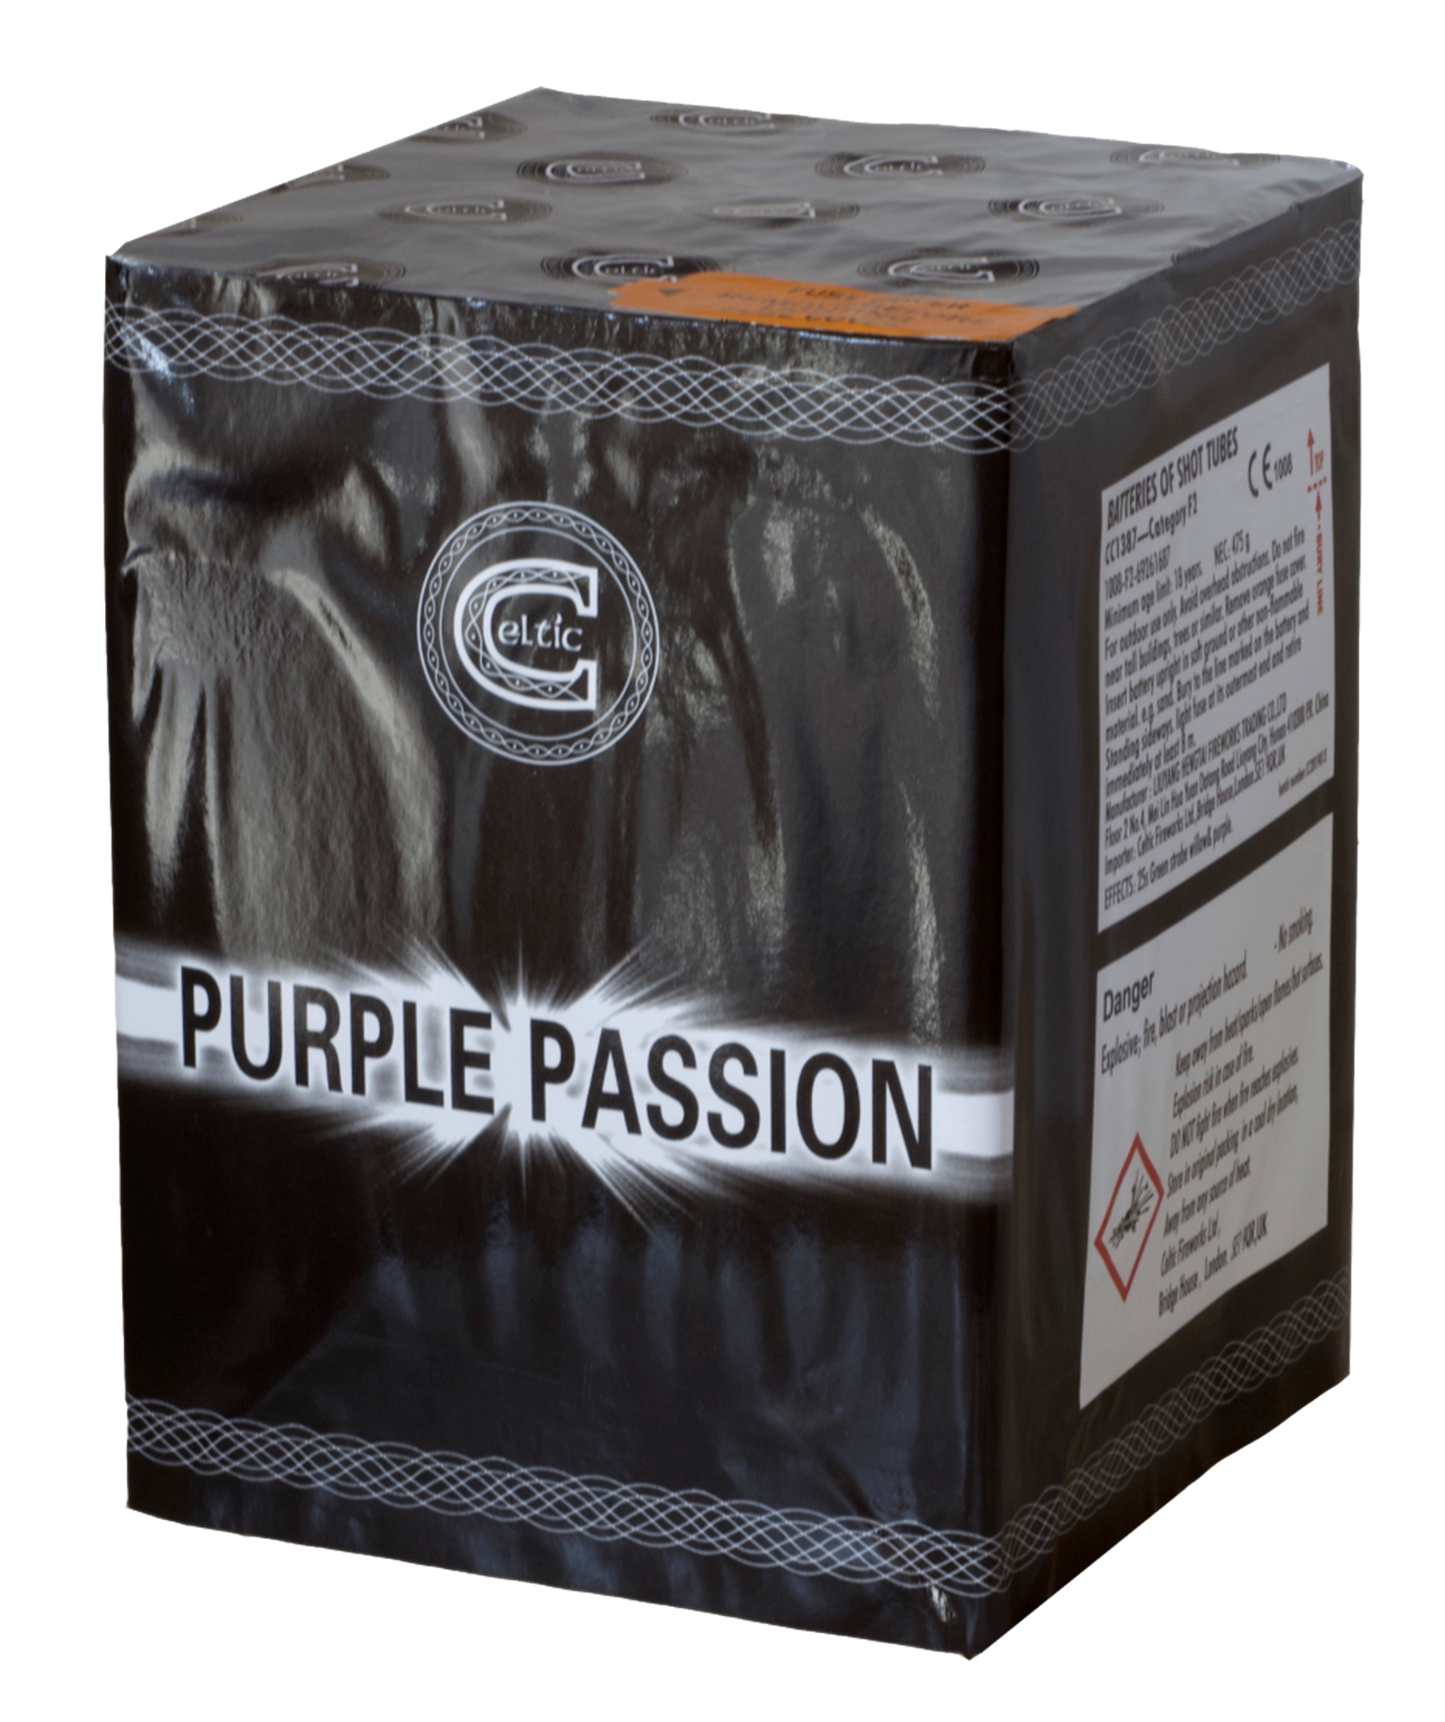 Purple Passion by Celtic Fireworks